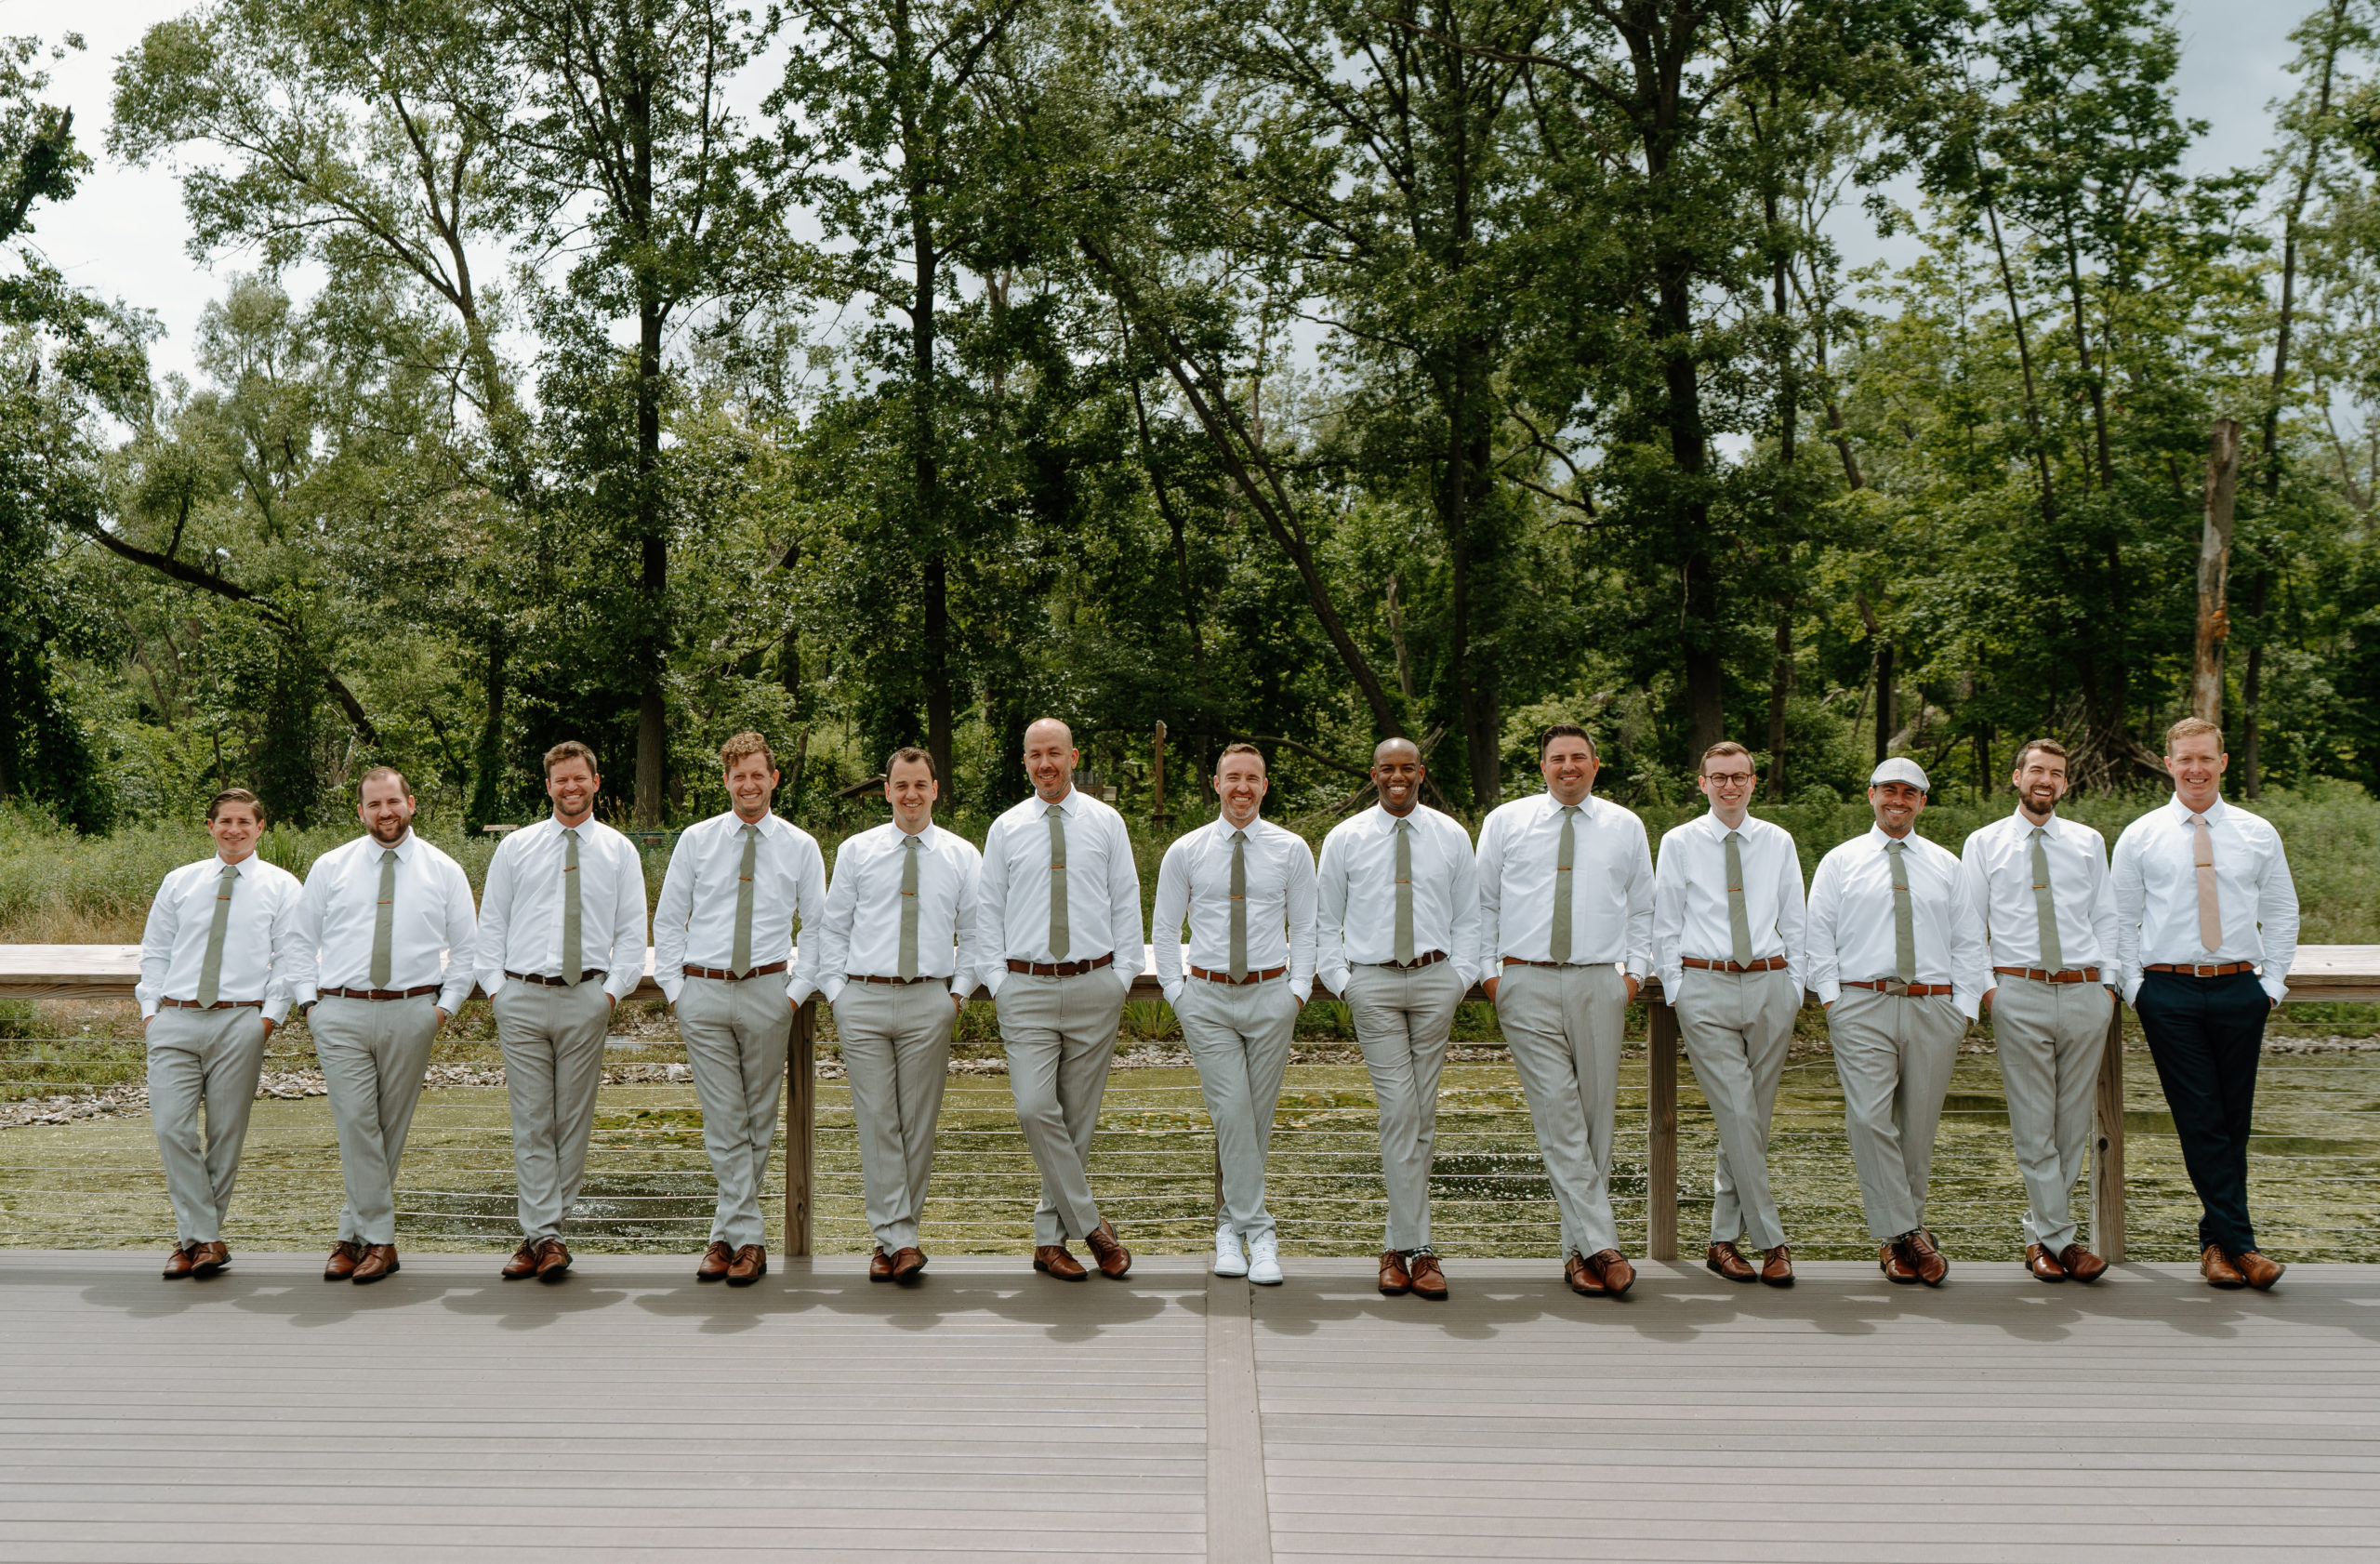 This is a groom with his groomsmen taking a picture on his wedding day